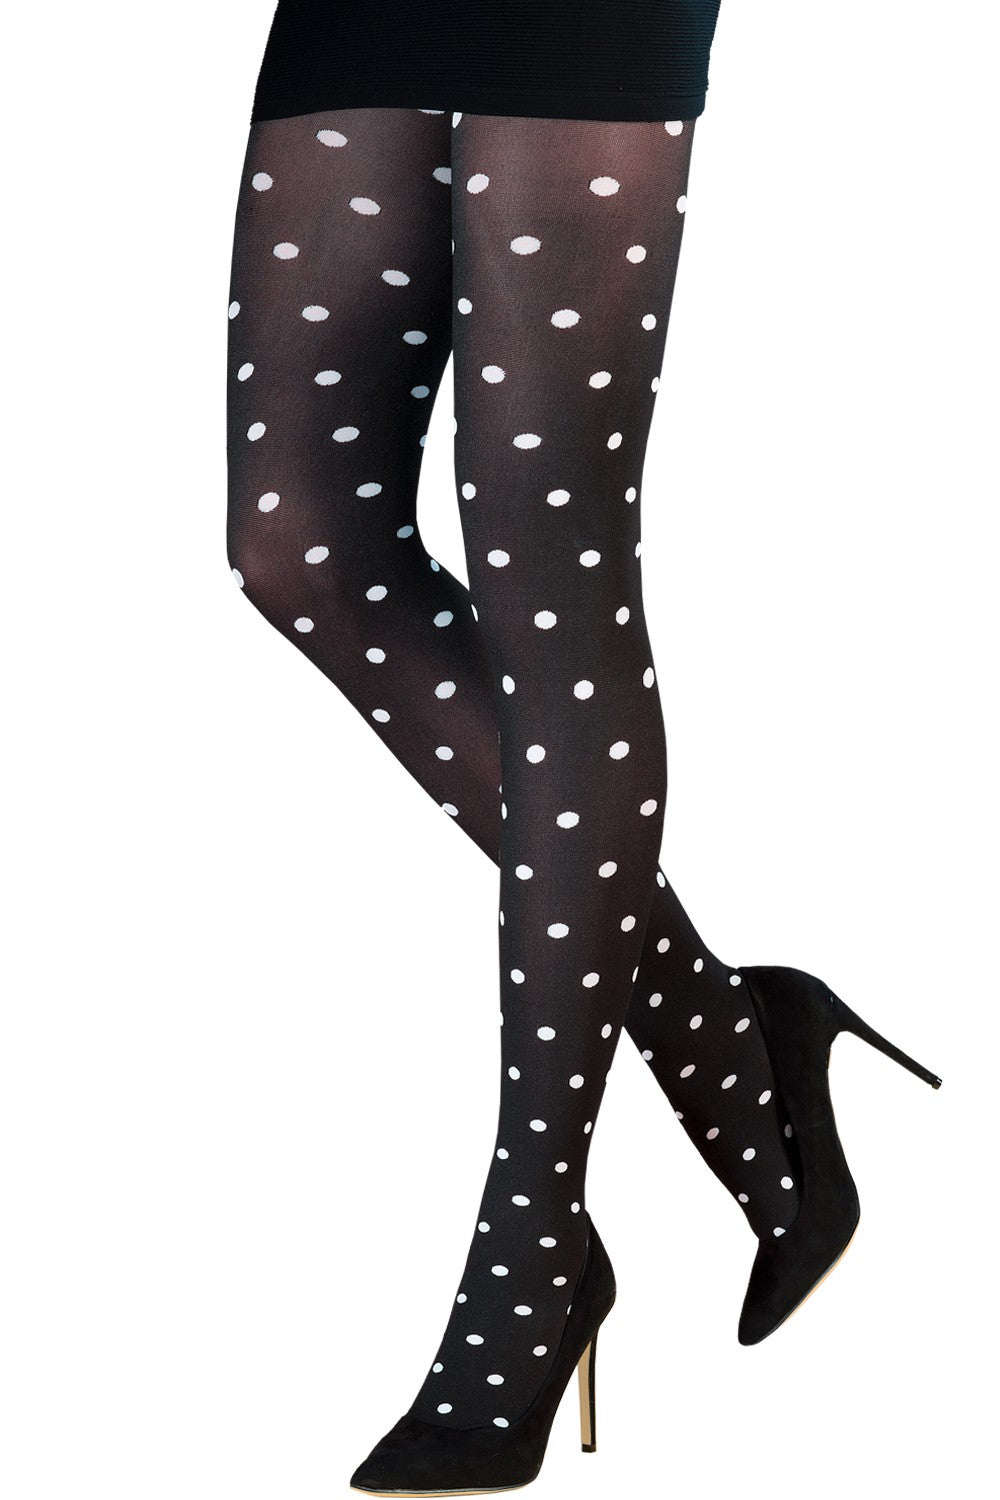 Emilio Cavallini Two Toned Small Dots Tights - Black opaque fashion tights with a woven white polka dot pattern.